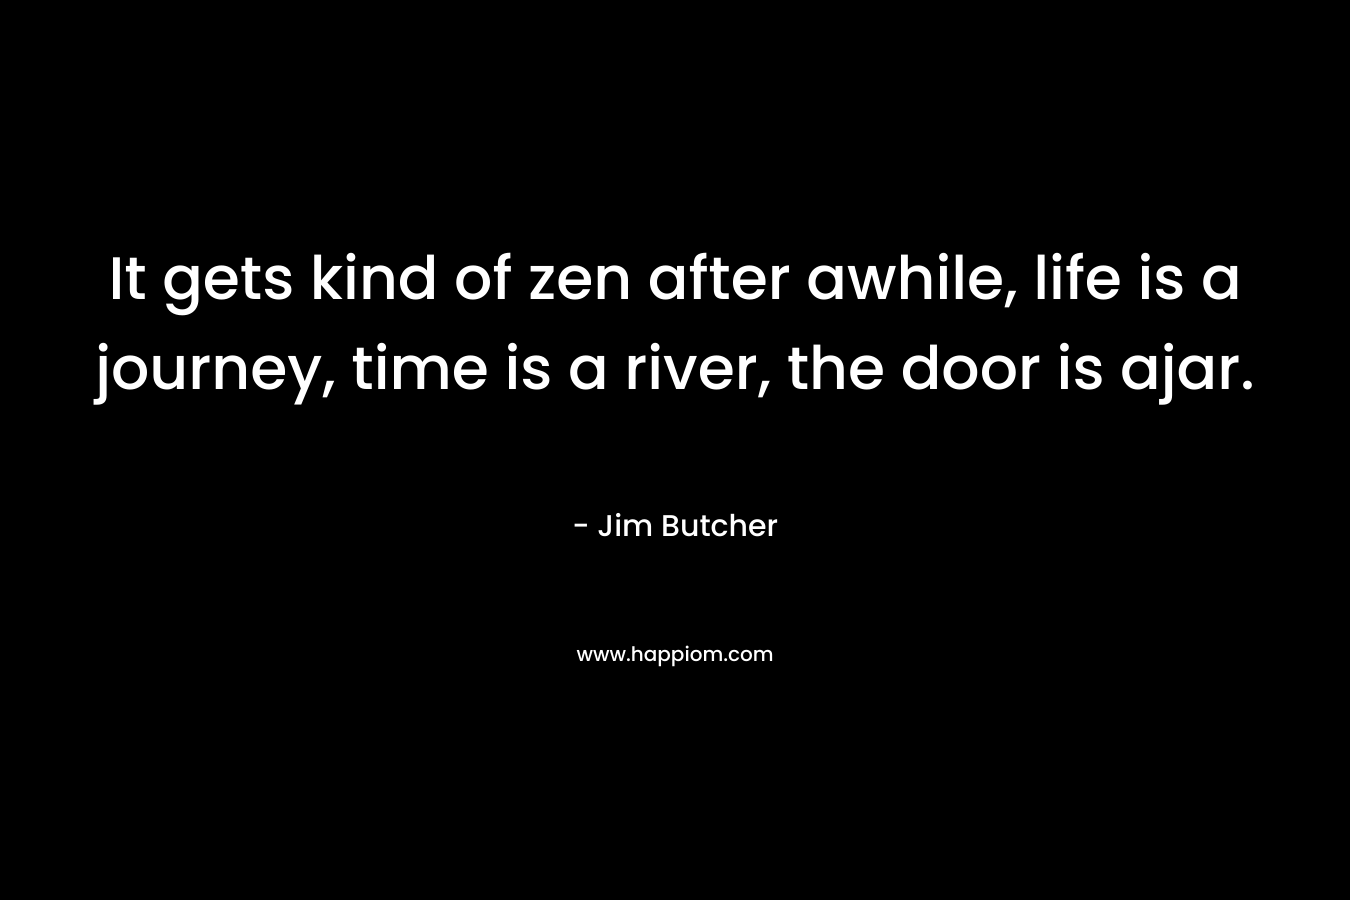 It gets kind of zen after awhile, life is a journey, time is a river, the door is ajar.